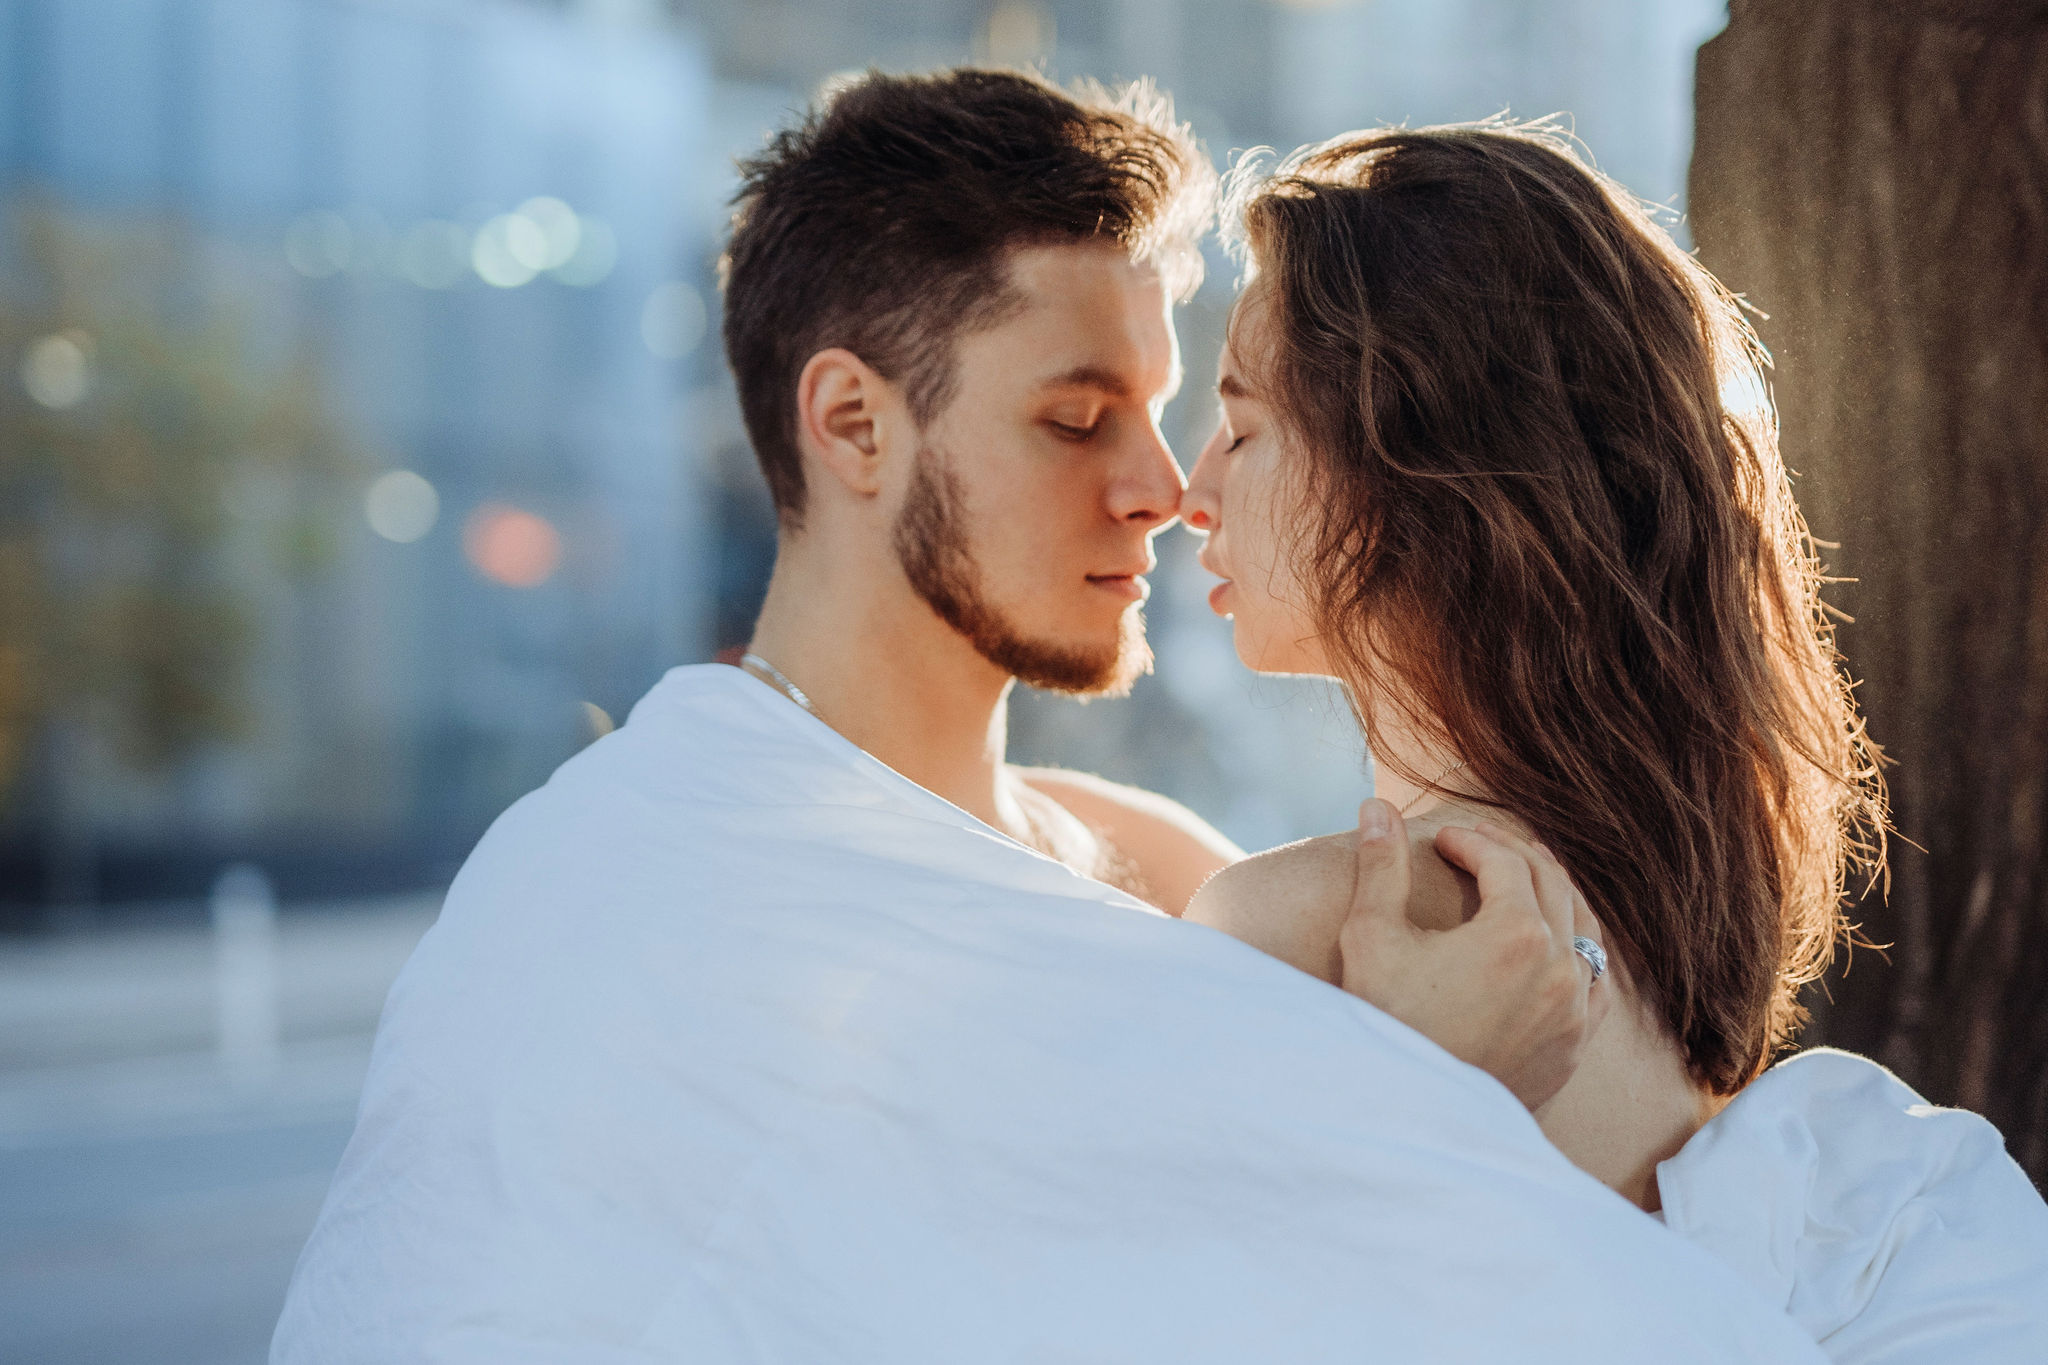 Wrapped In Blankets: Engagement Photoshoot